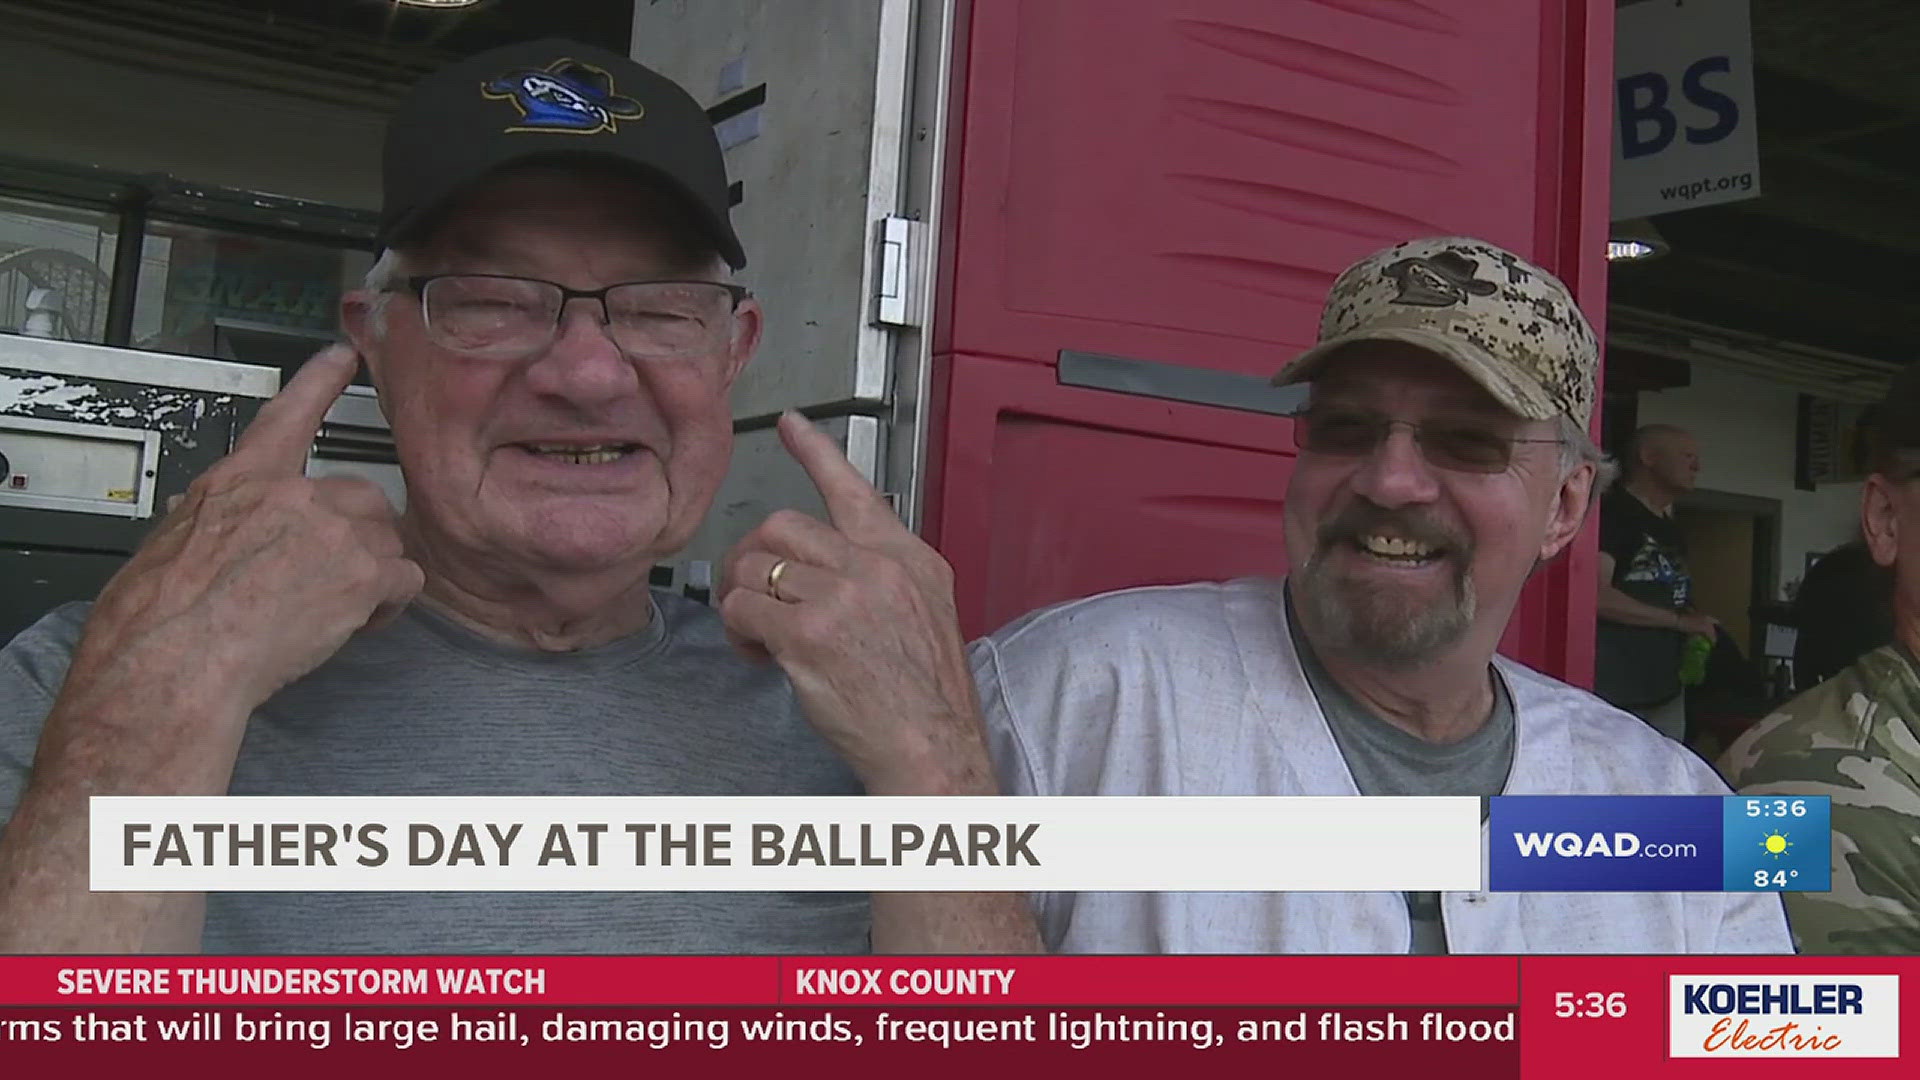 Many people at Sunday's River Bandits game were celebrating the dads in their lives.